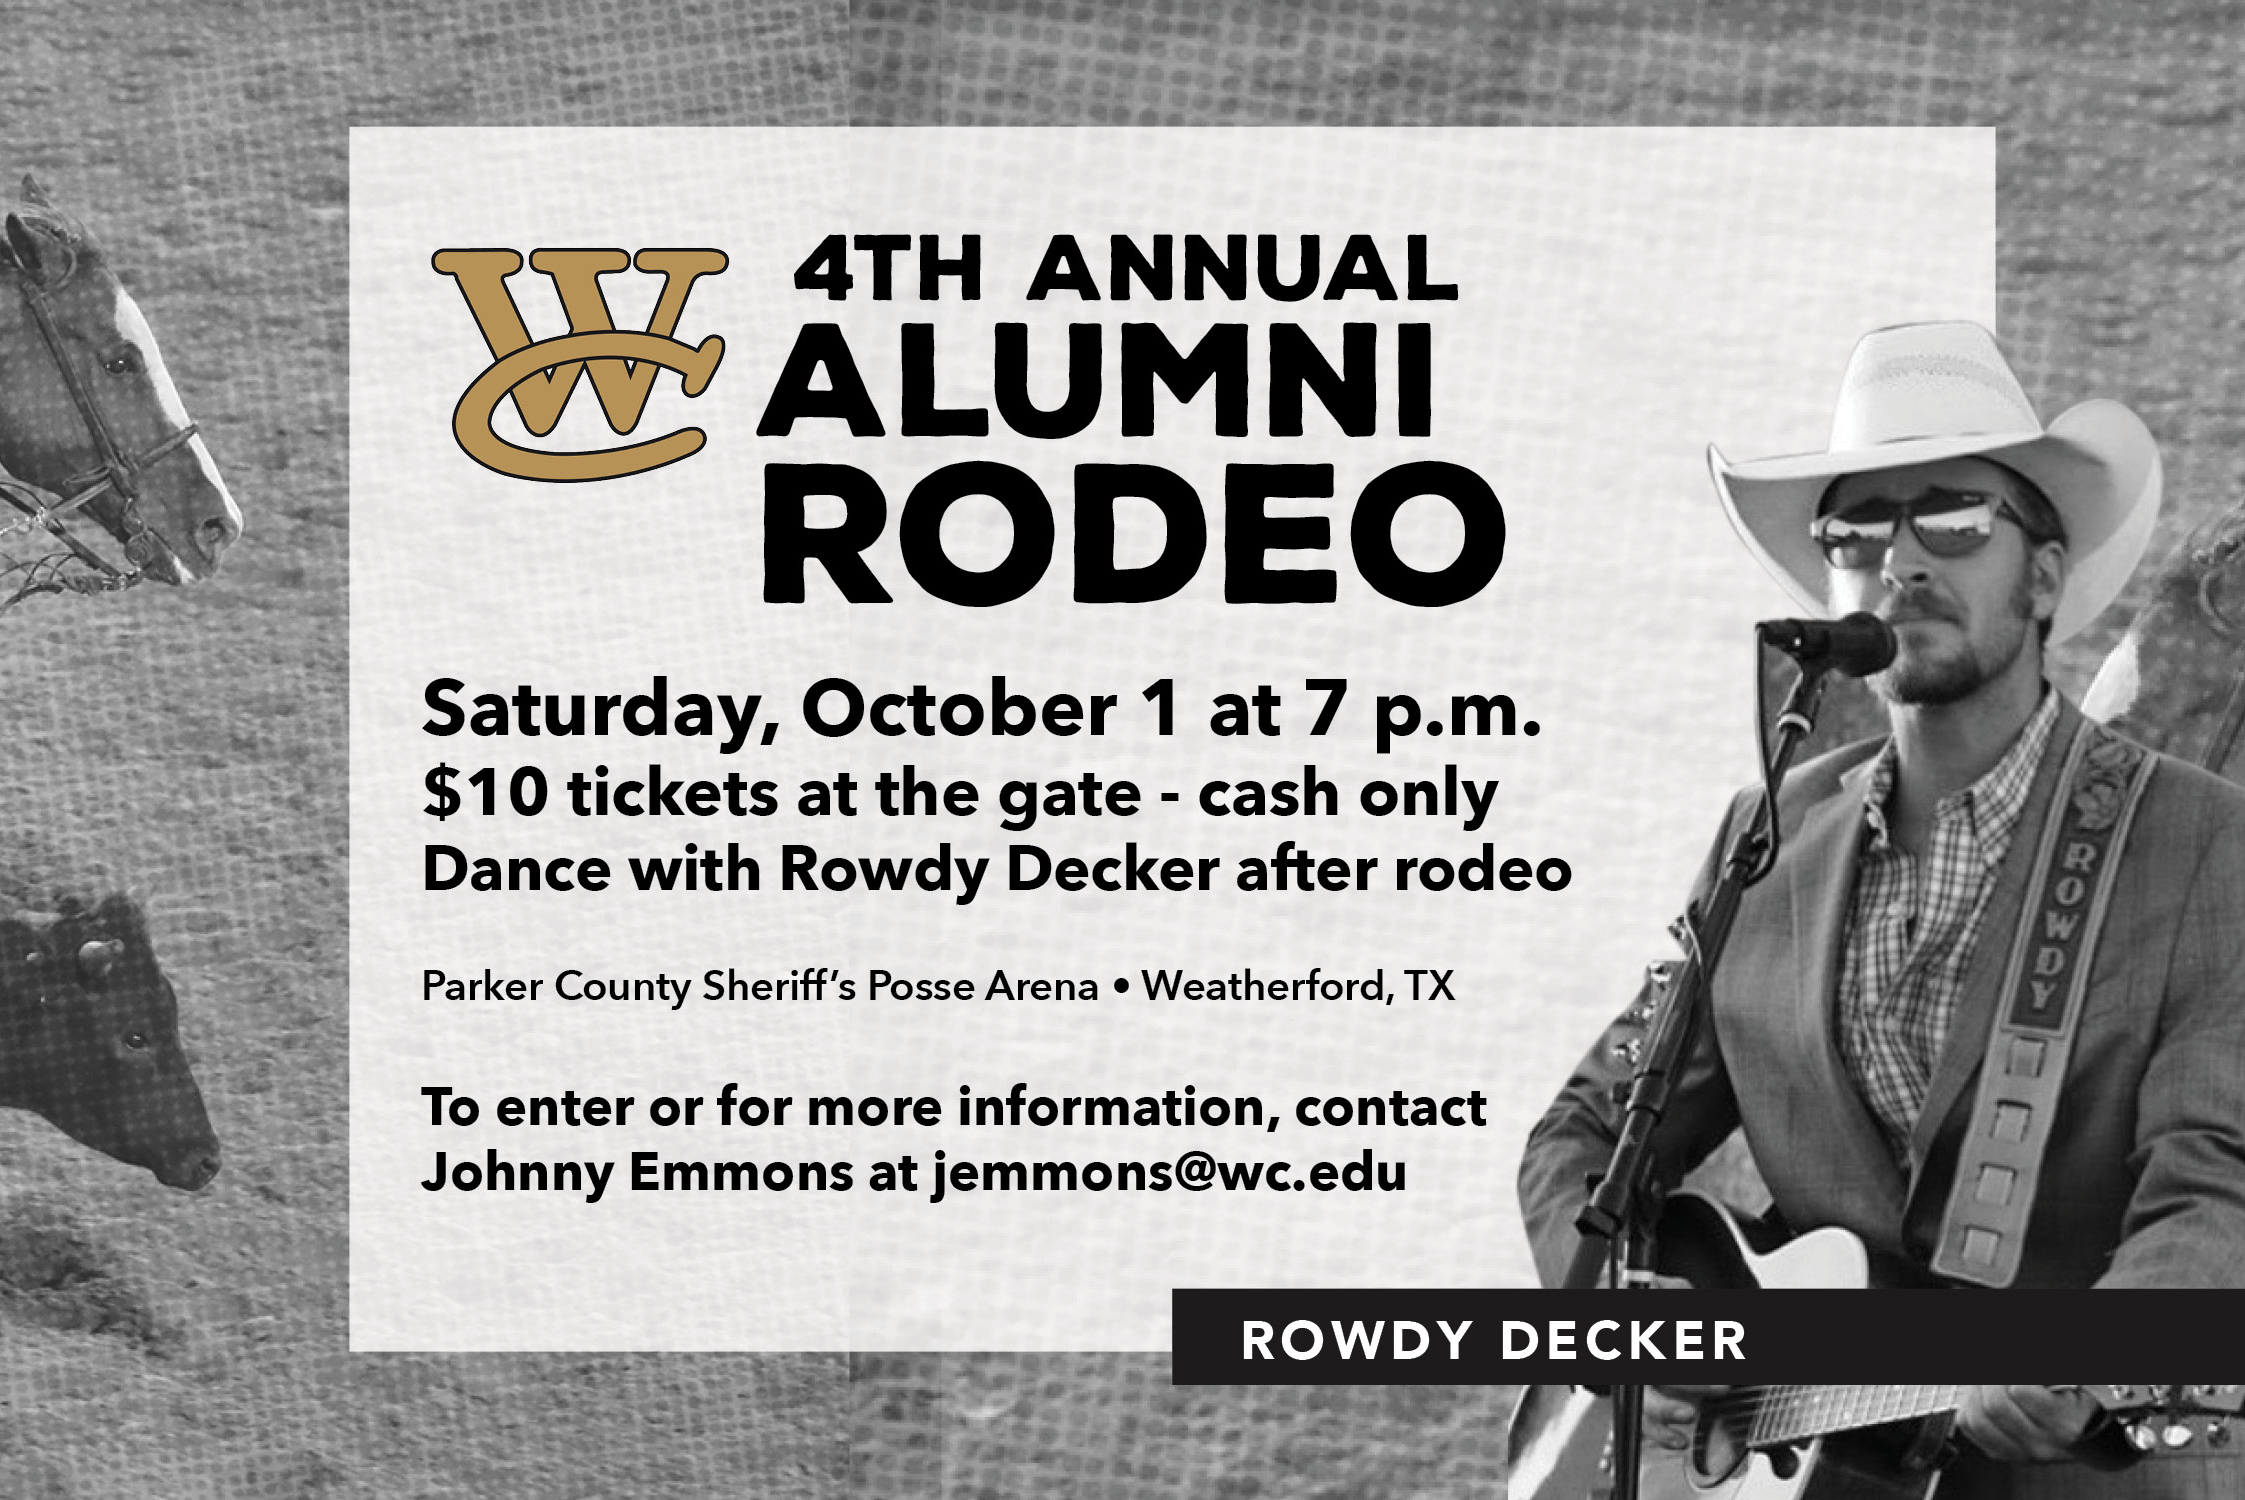 WC Alumni Rodeo slated for Saturday